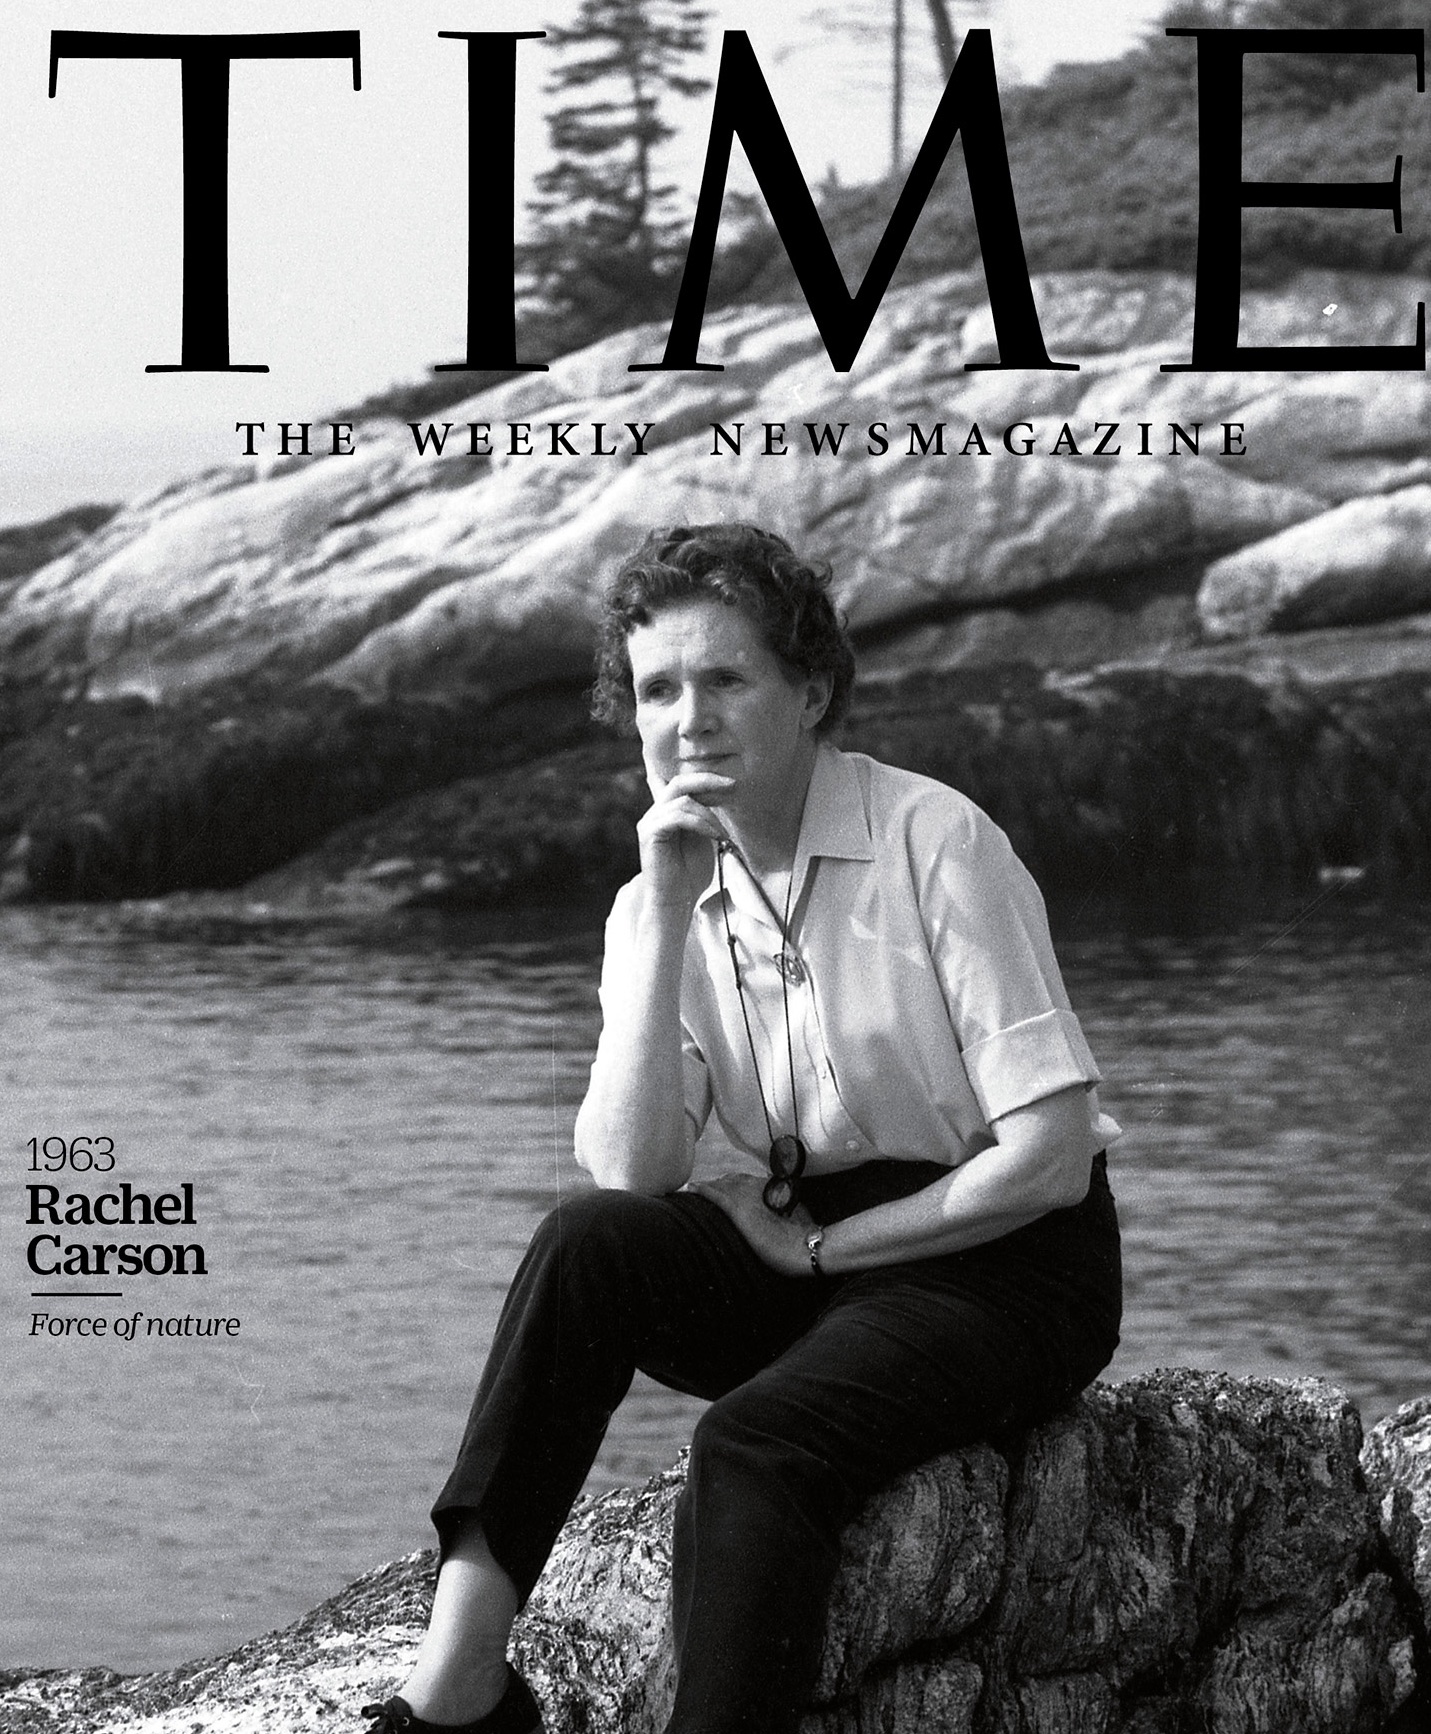 Author Rachel Carson on the cover of Time magazine 1963